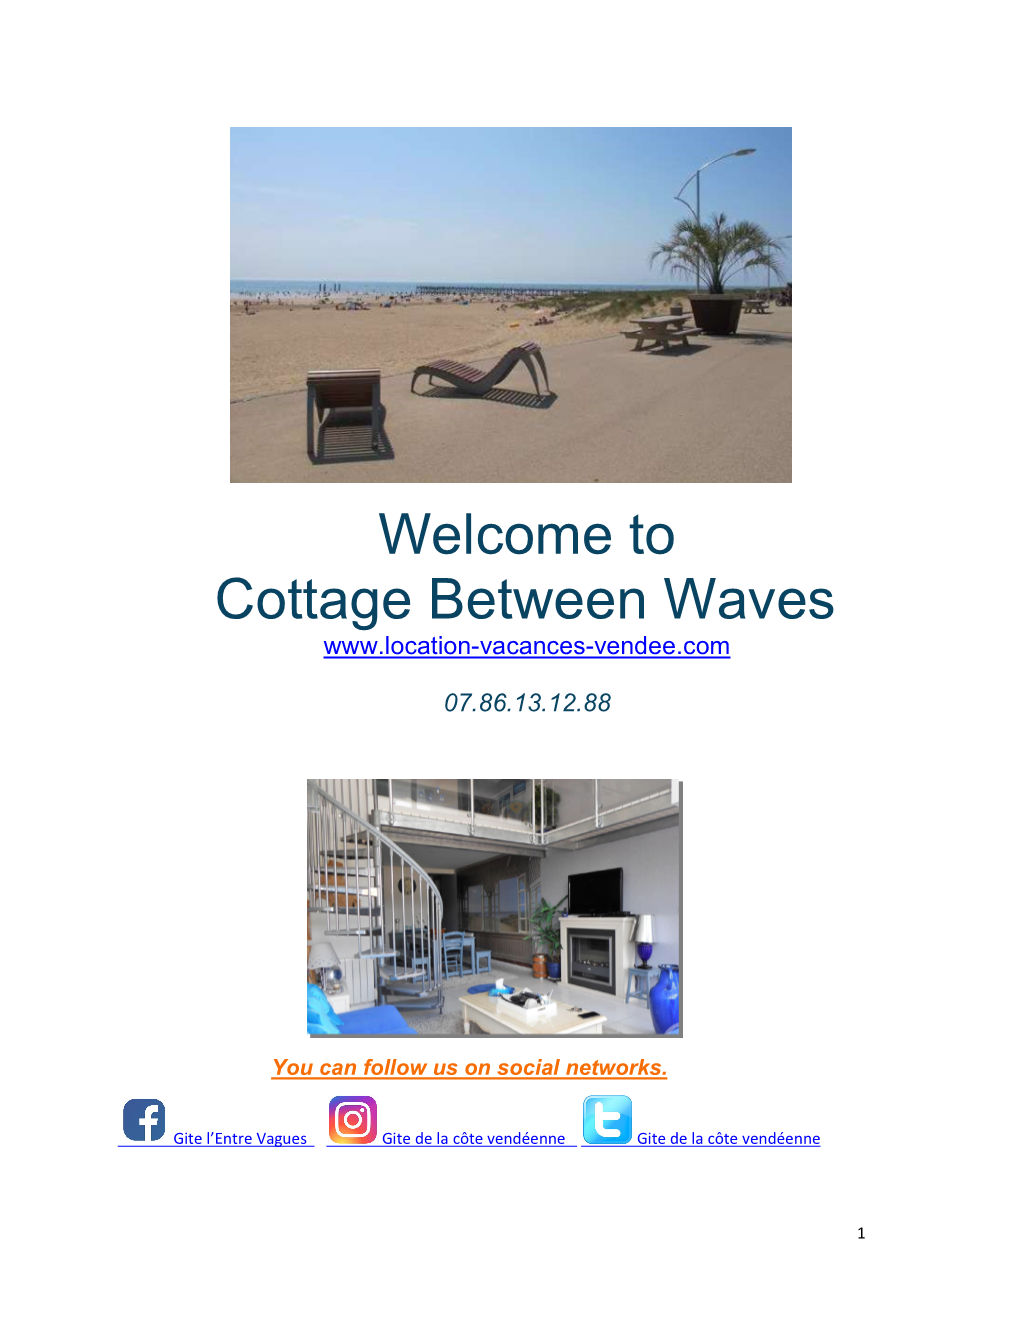 Welcome to Cottage Between Waves